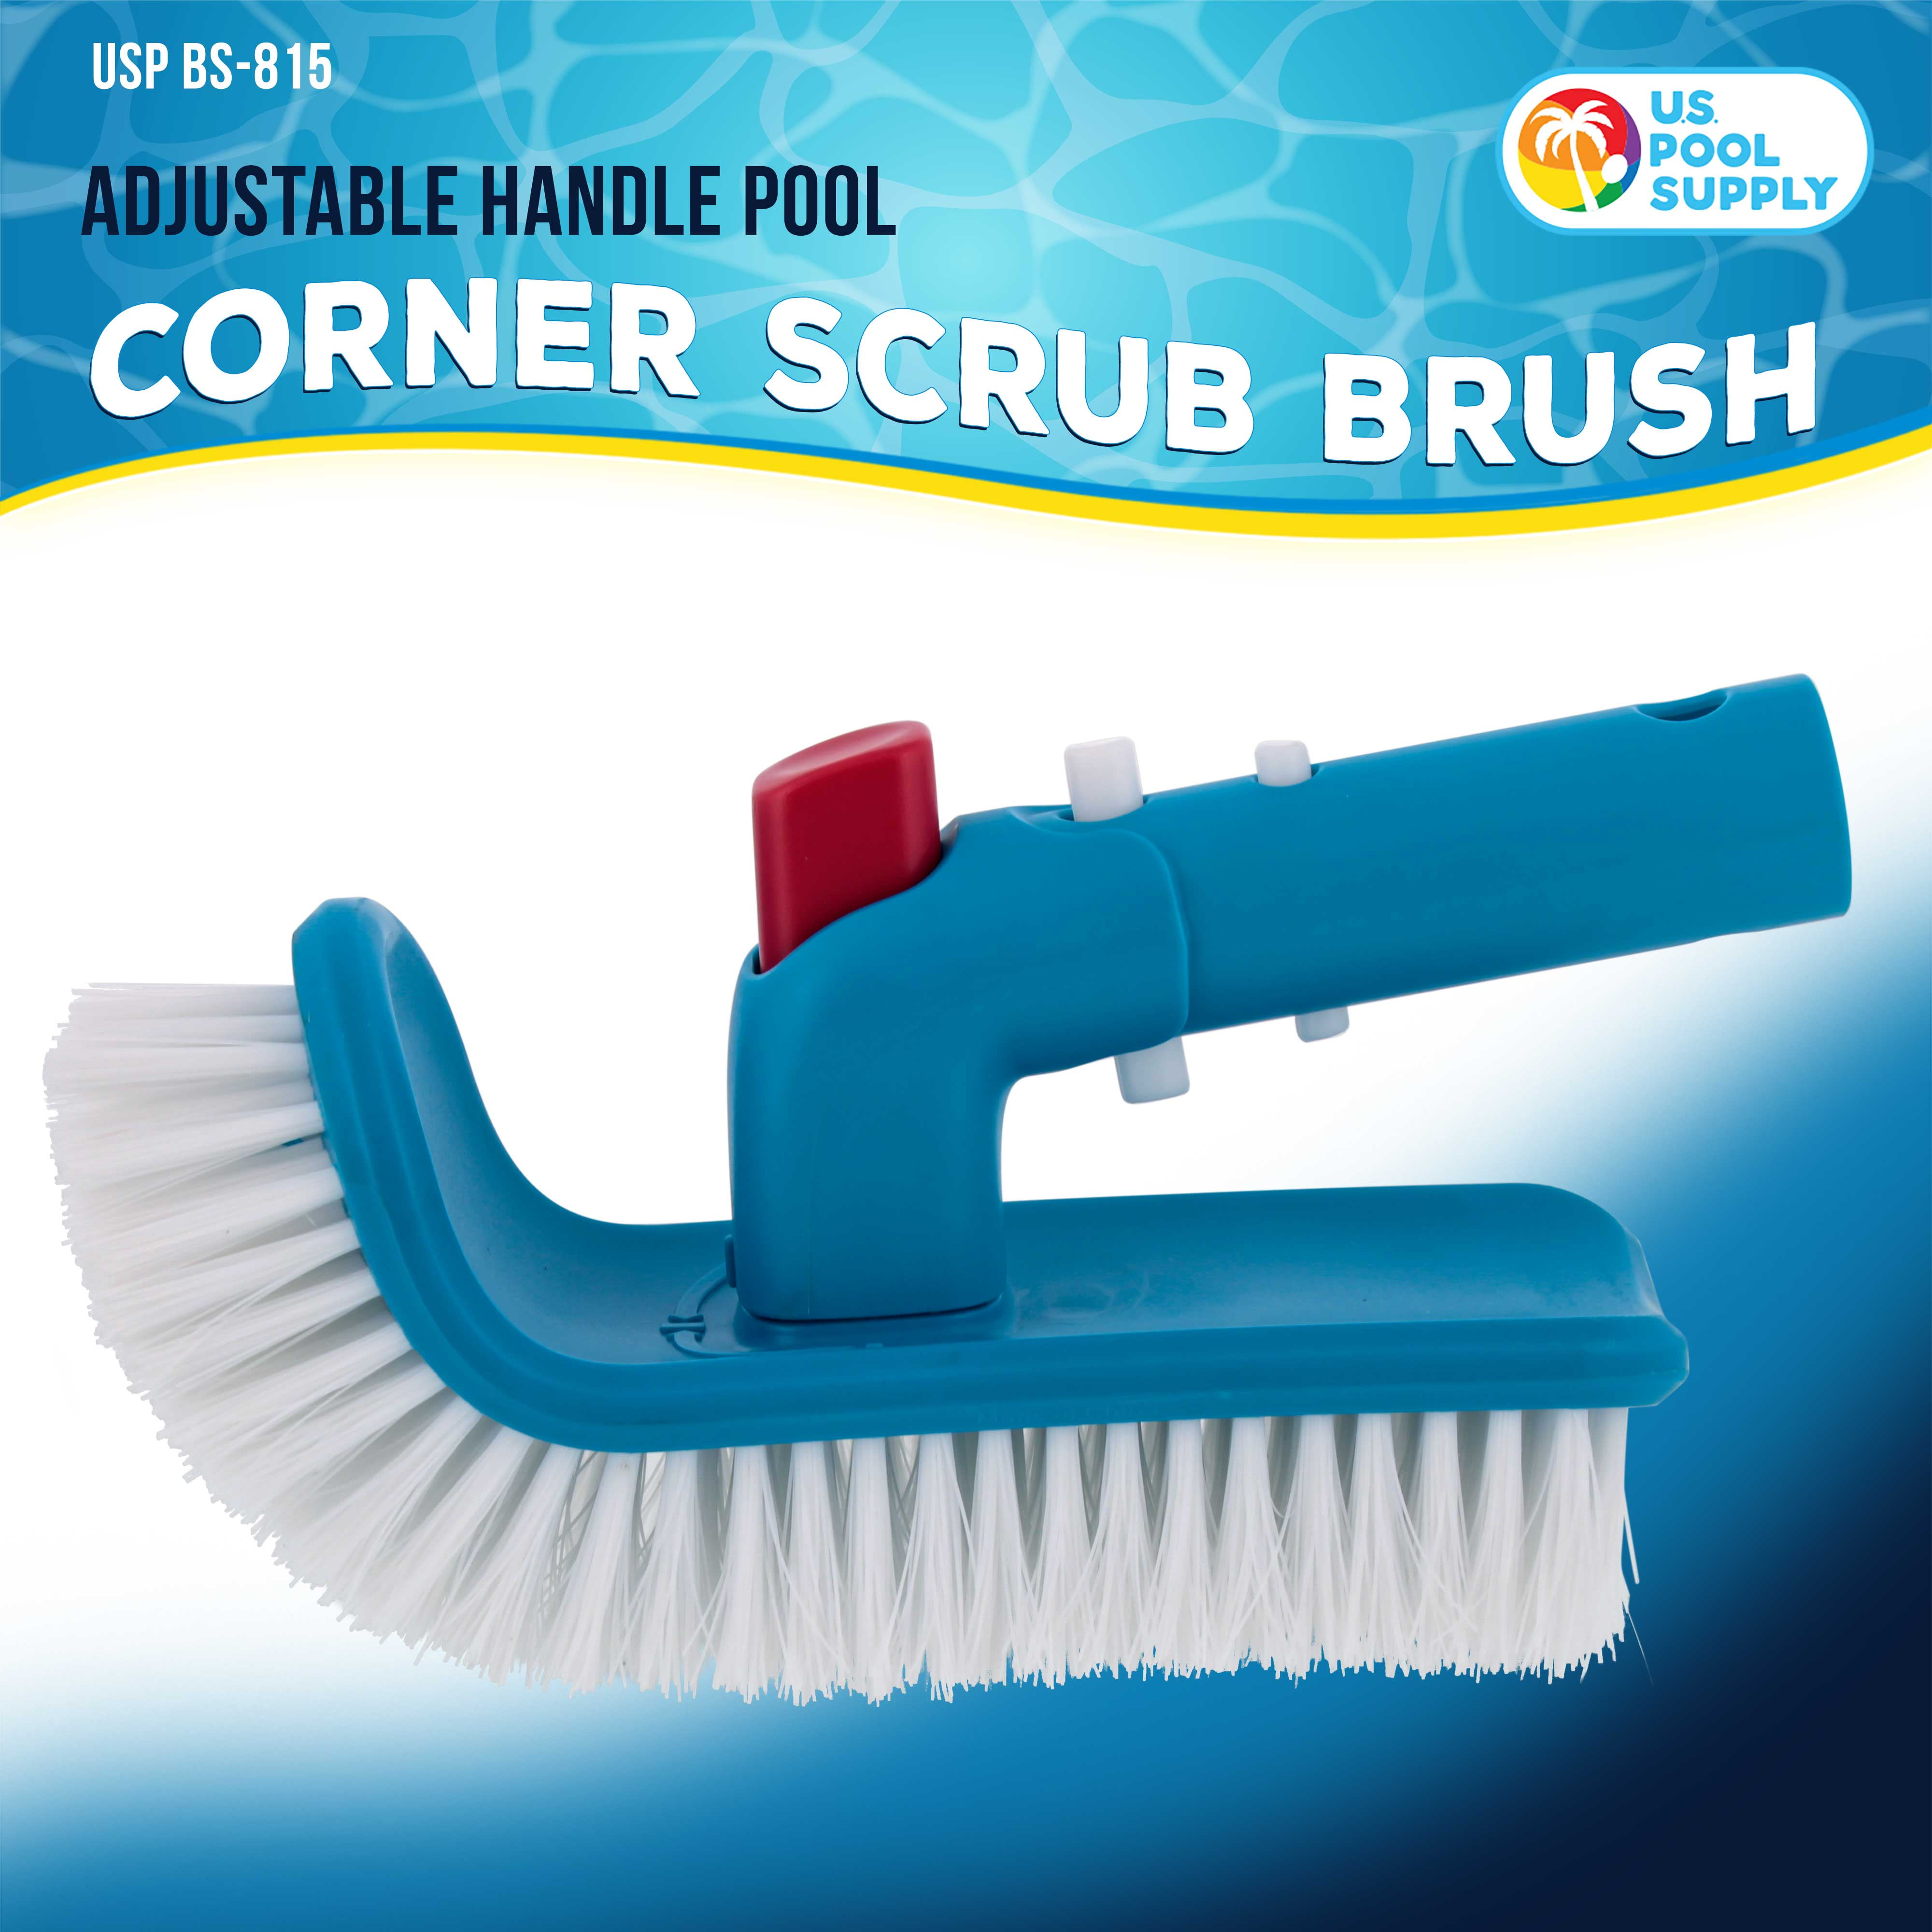 U.S. Pool Supply® Professional Pool Step and Corner Cleaning Brush with  Adjustable 180 Degree Handle Rotation, Scrub Clean Swimming Pools Spas Hot